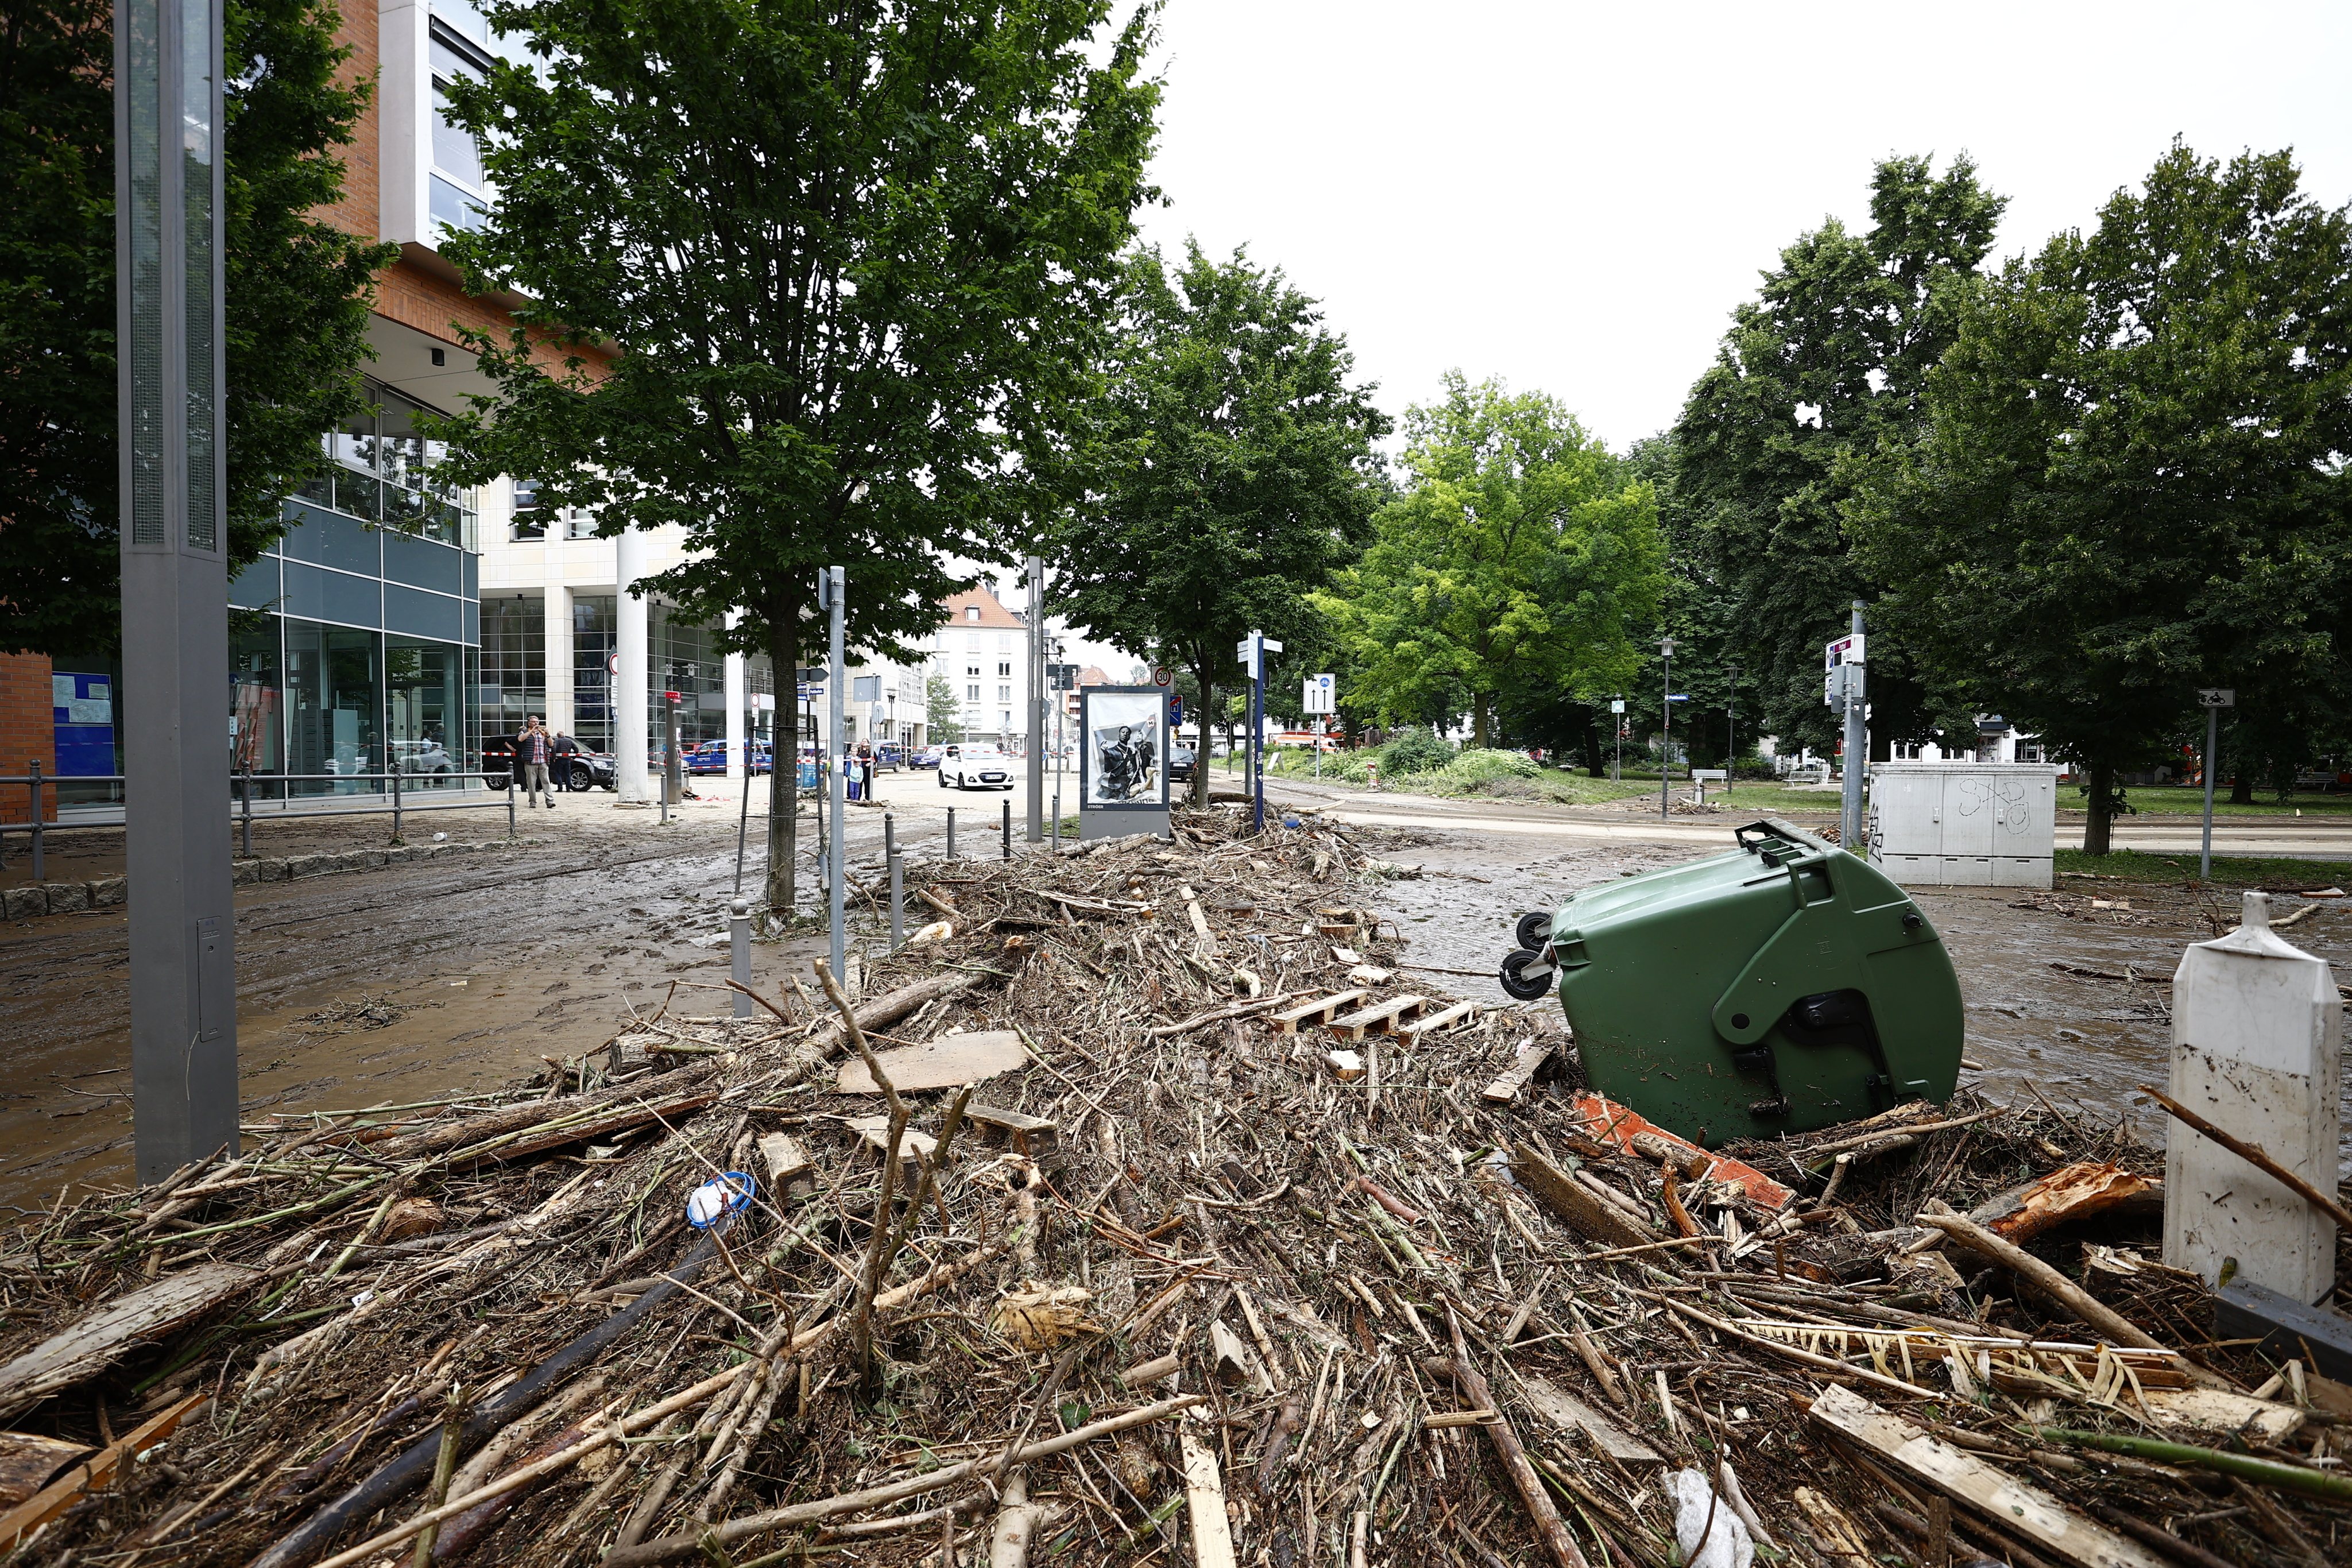 Death toll surges to 42 in floods in Germany